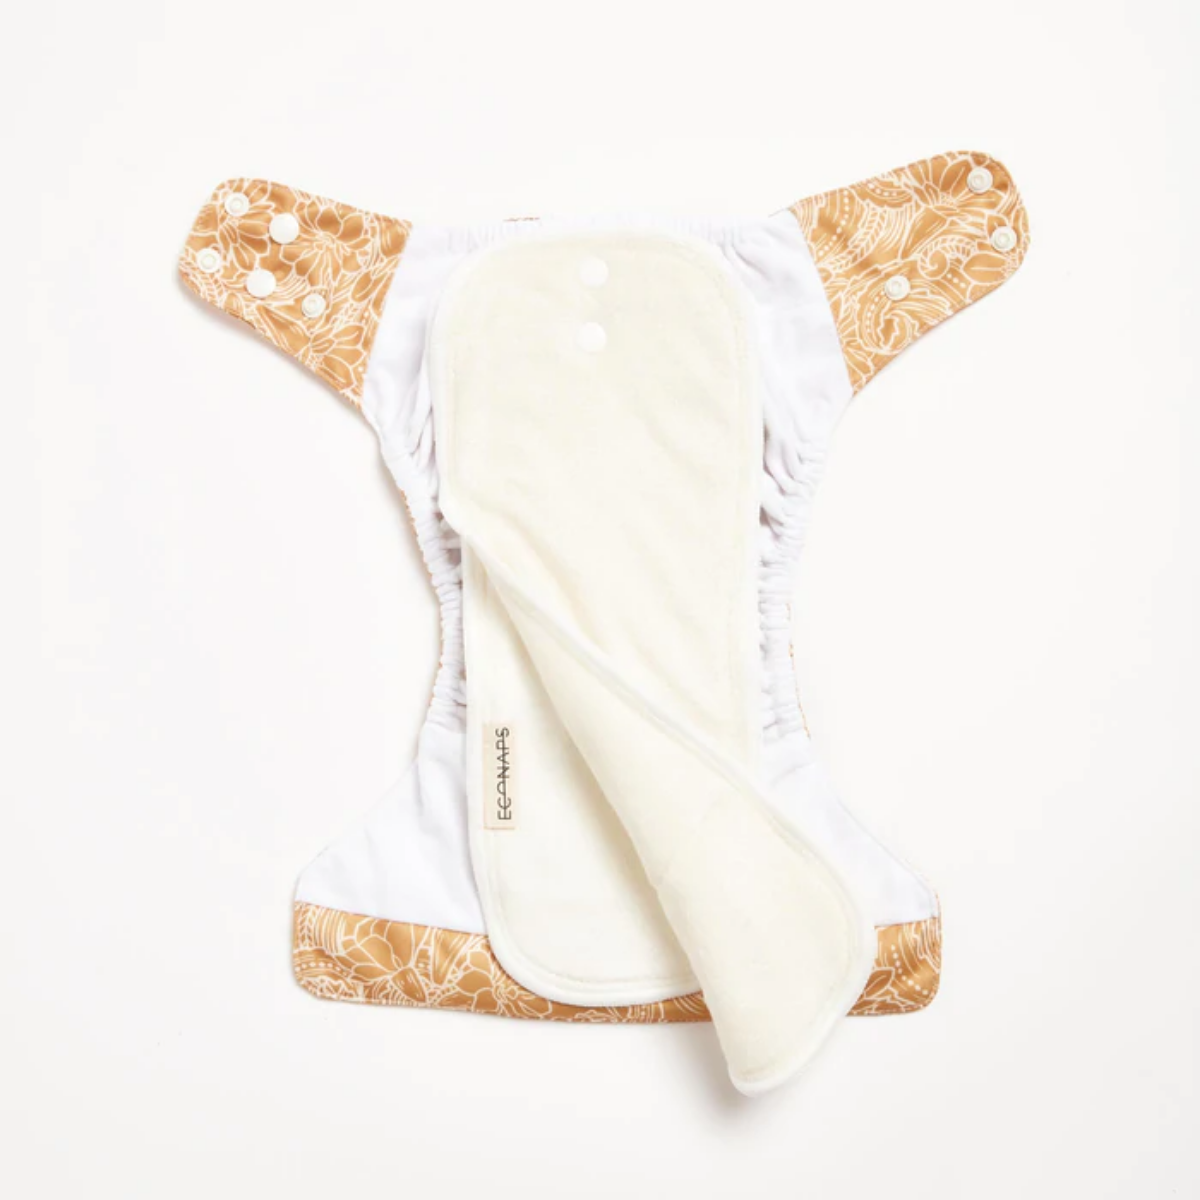 An open modern cloth diaper with a native print from EcoNaps in the shade Desert Cactus on a white surface.